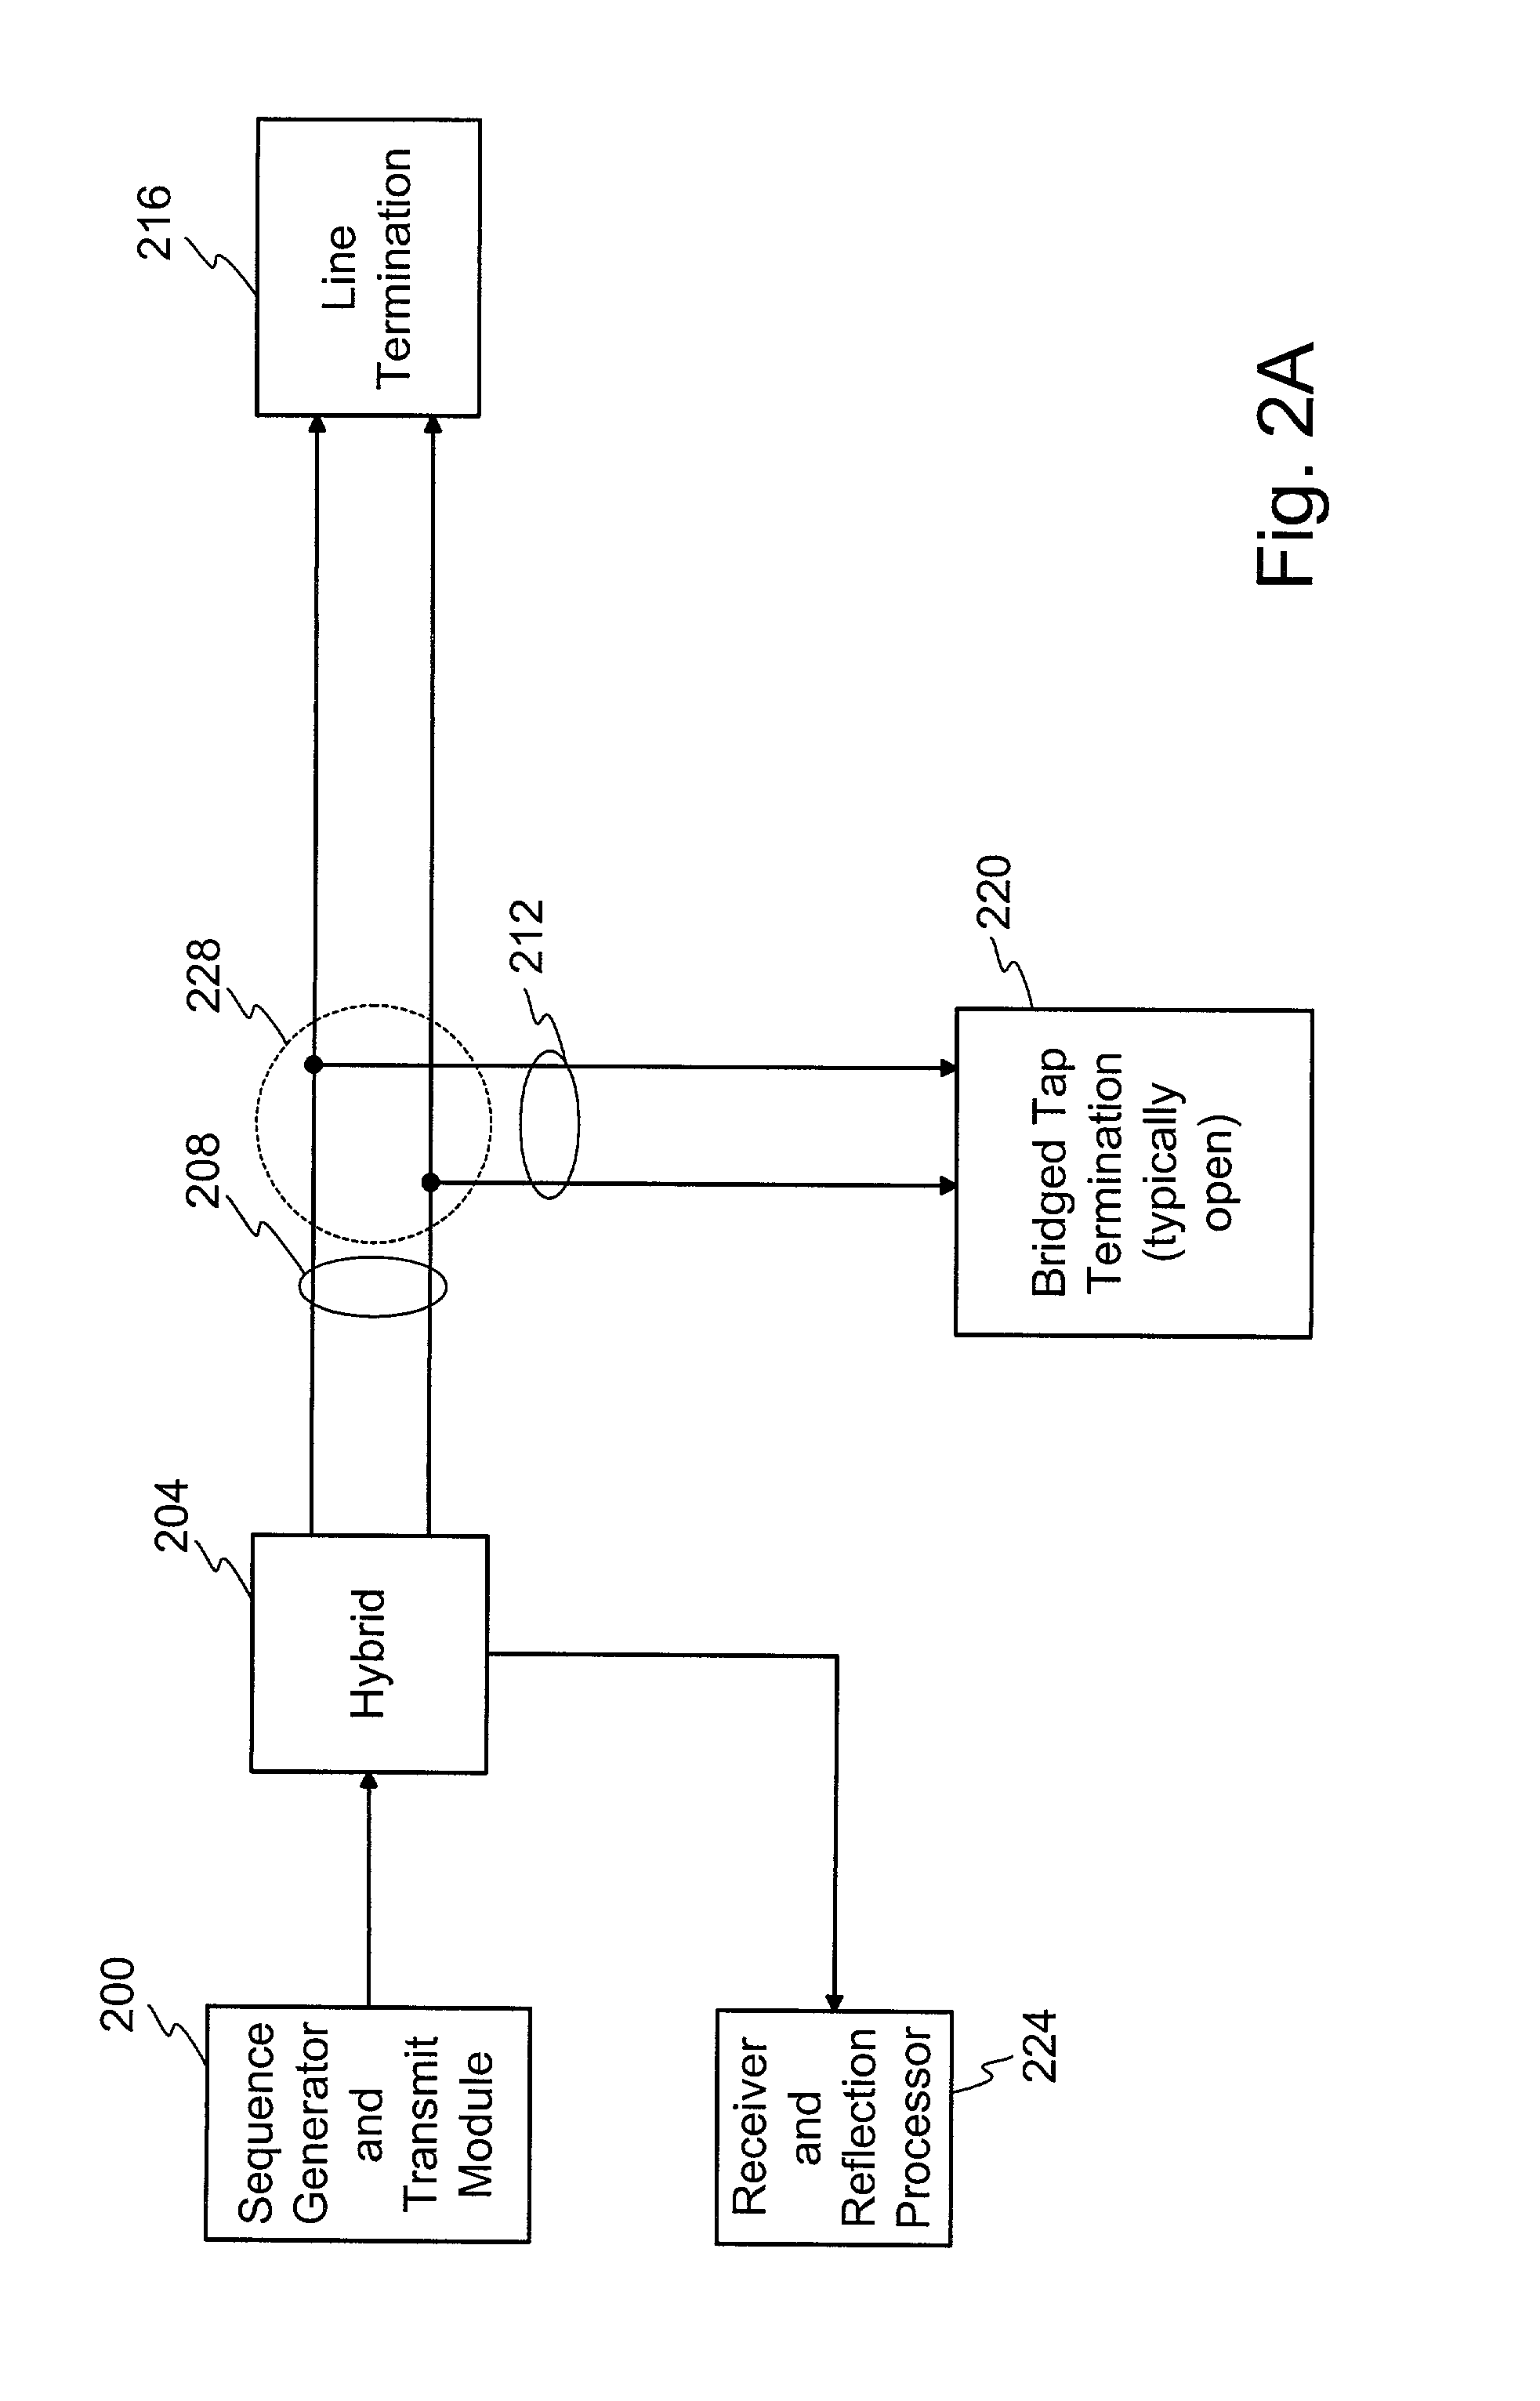 Method and apparatus for transmission line analysis